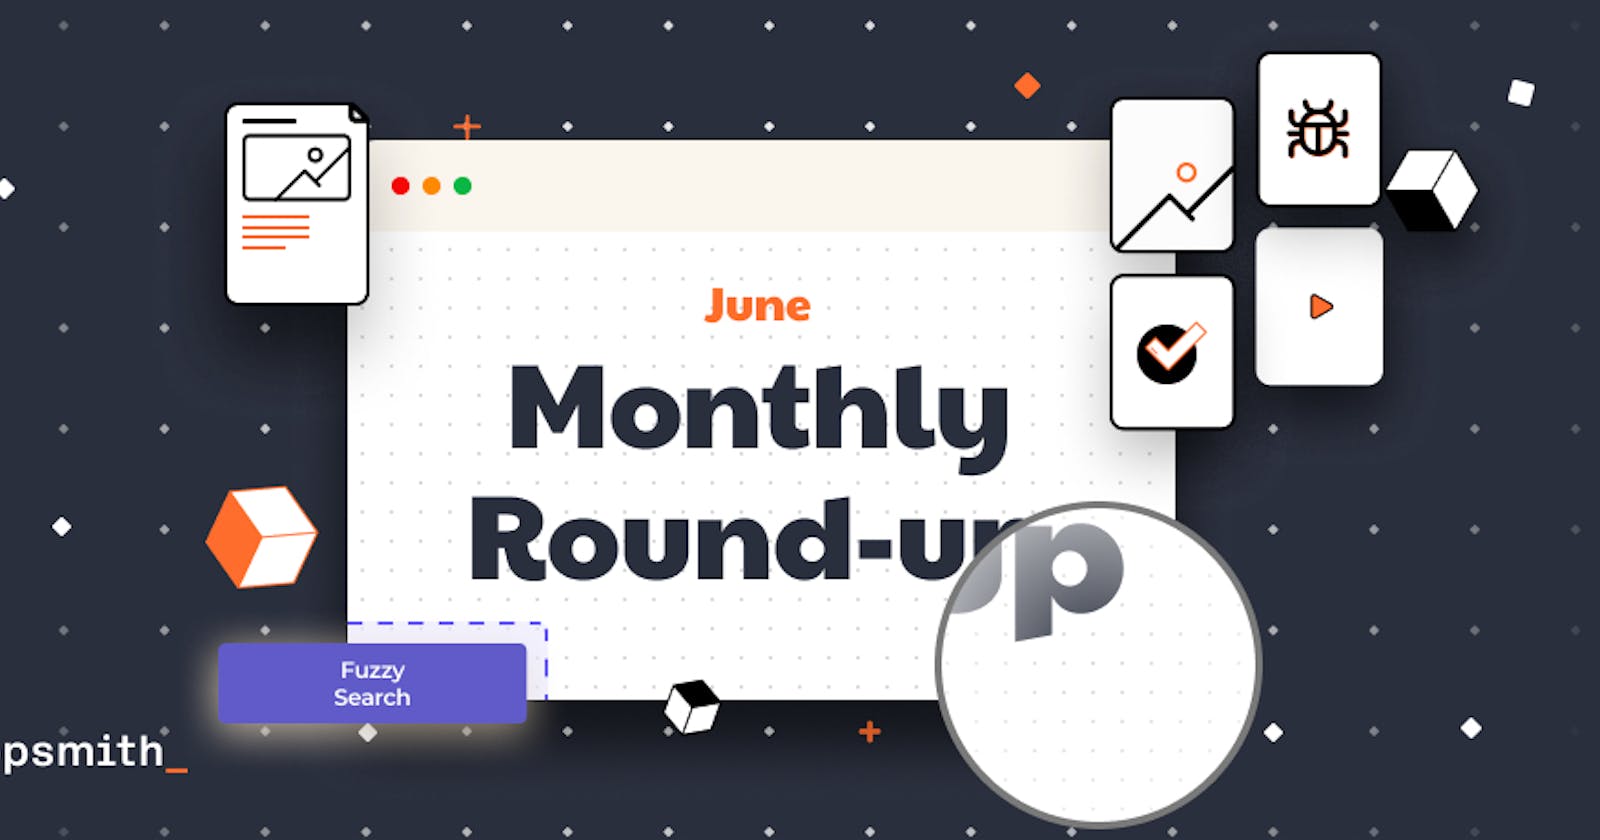 June Round-up: Fuzzy Search, Backup and Restore, More Product Updates